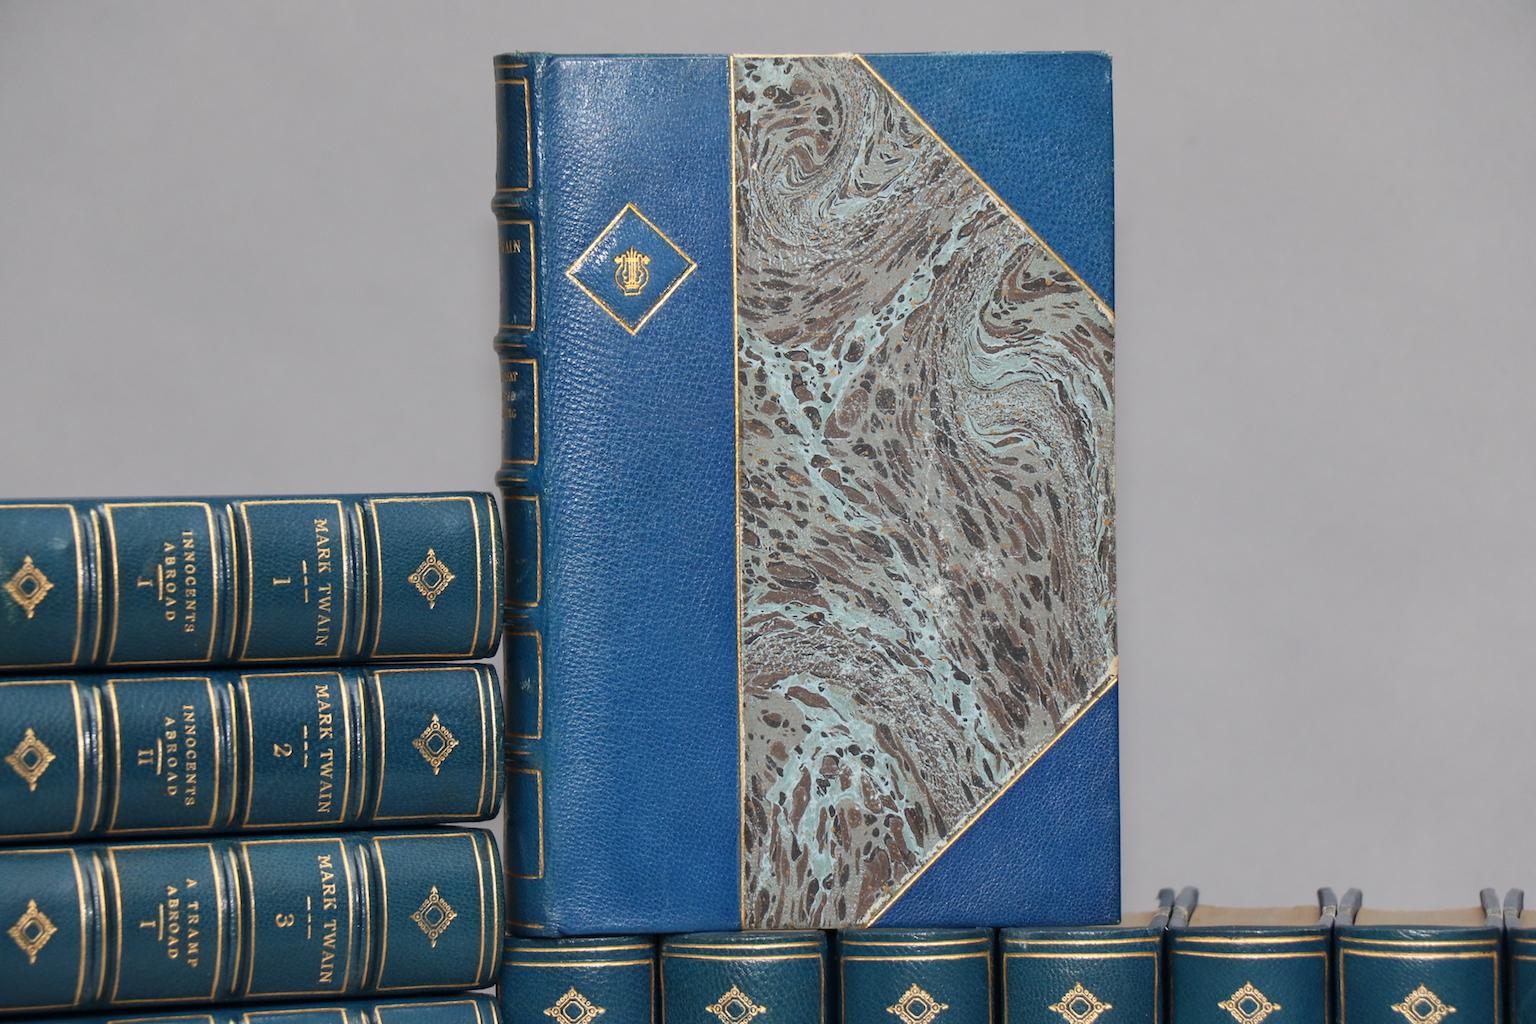 Leather bound. 25 volumes. Bound in three-quarter turquoise morocco leather with marbled boards, top edges gilt, raised bands, and gilt panels on spines. Illustrated throughout. A handsome set of a classic American author! Very good. Published in